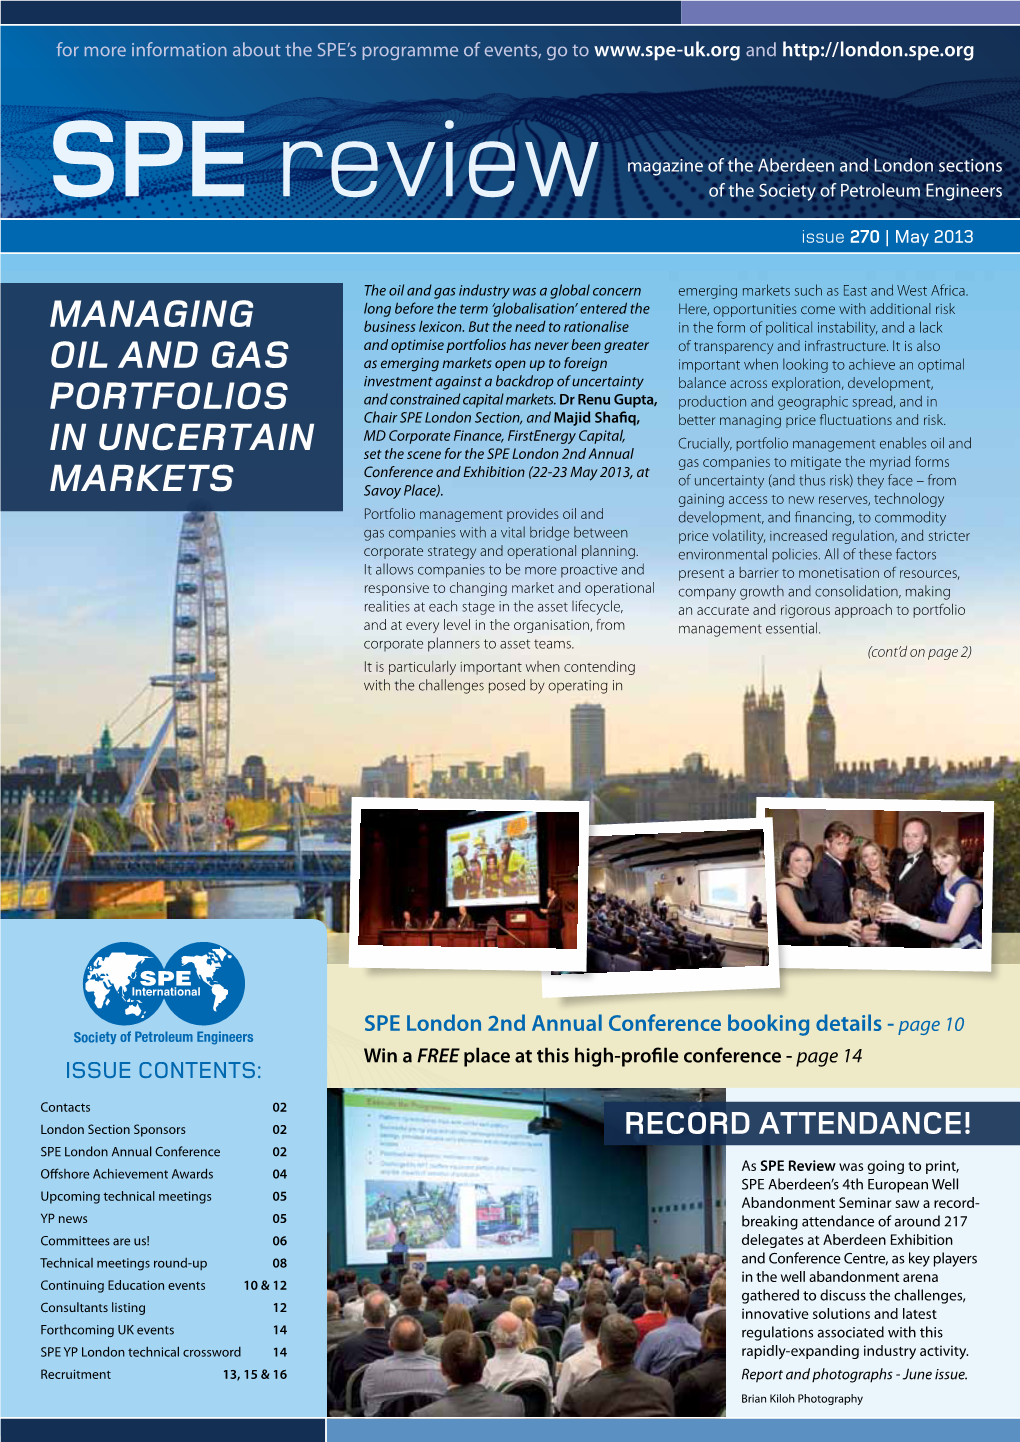 SPE Review Magazine of the Aberdeen and London Sections